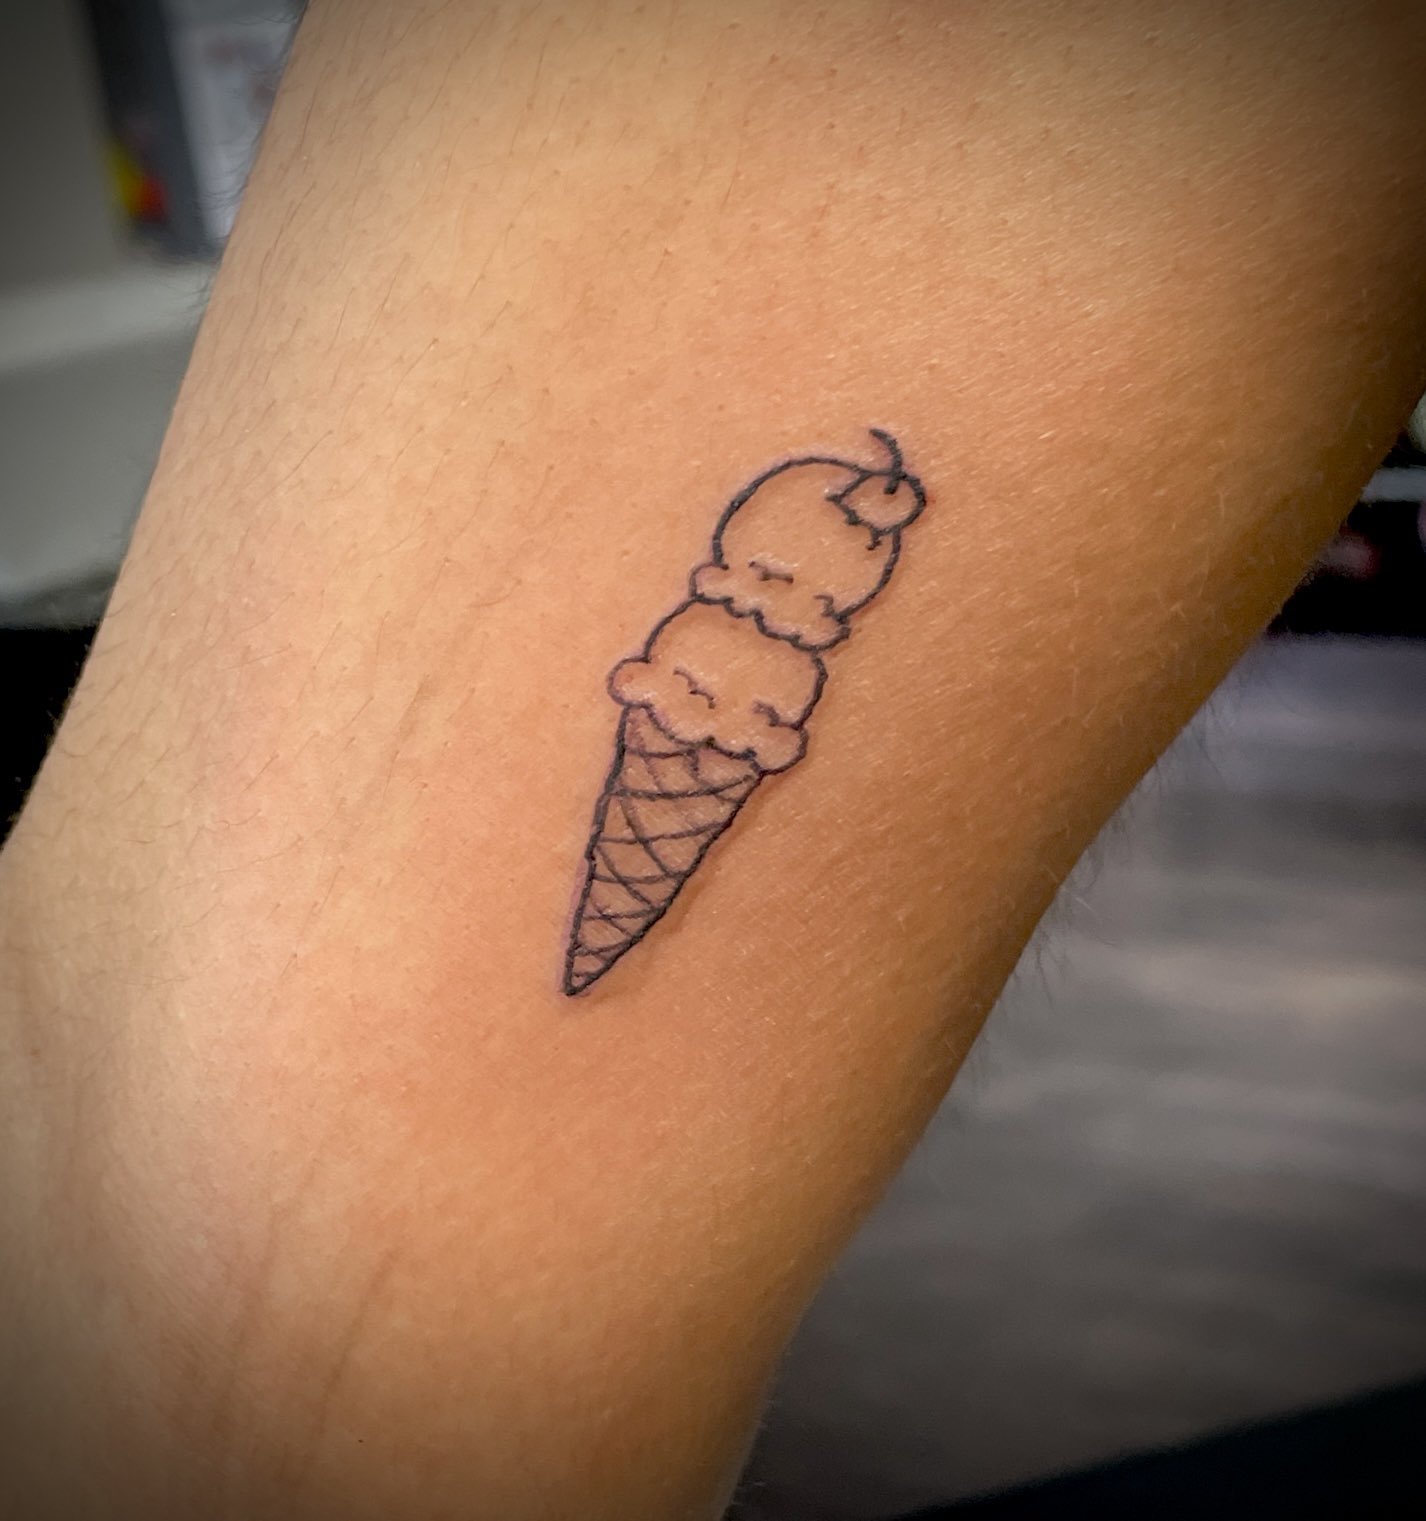 Deconstructed Ice Cream Sketch done by Jessica J at Tate St Tattoo Co in  Greensboro NC  rtattoo